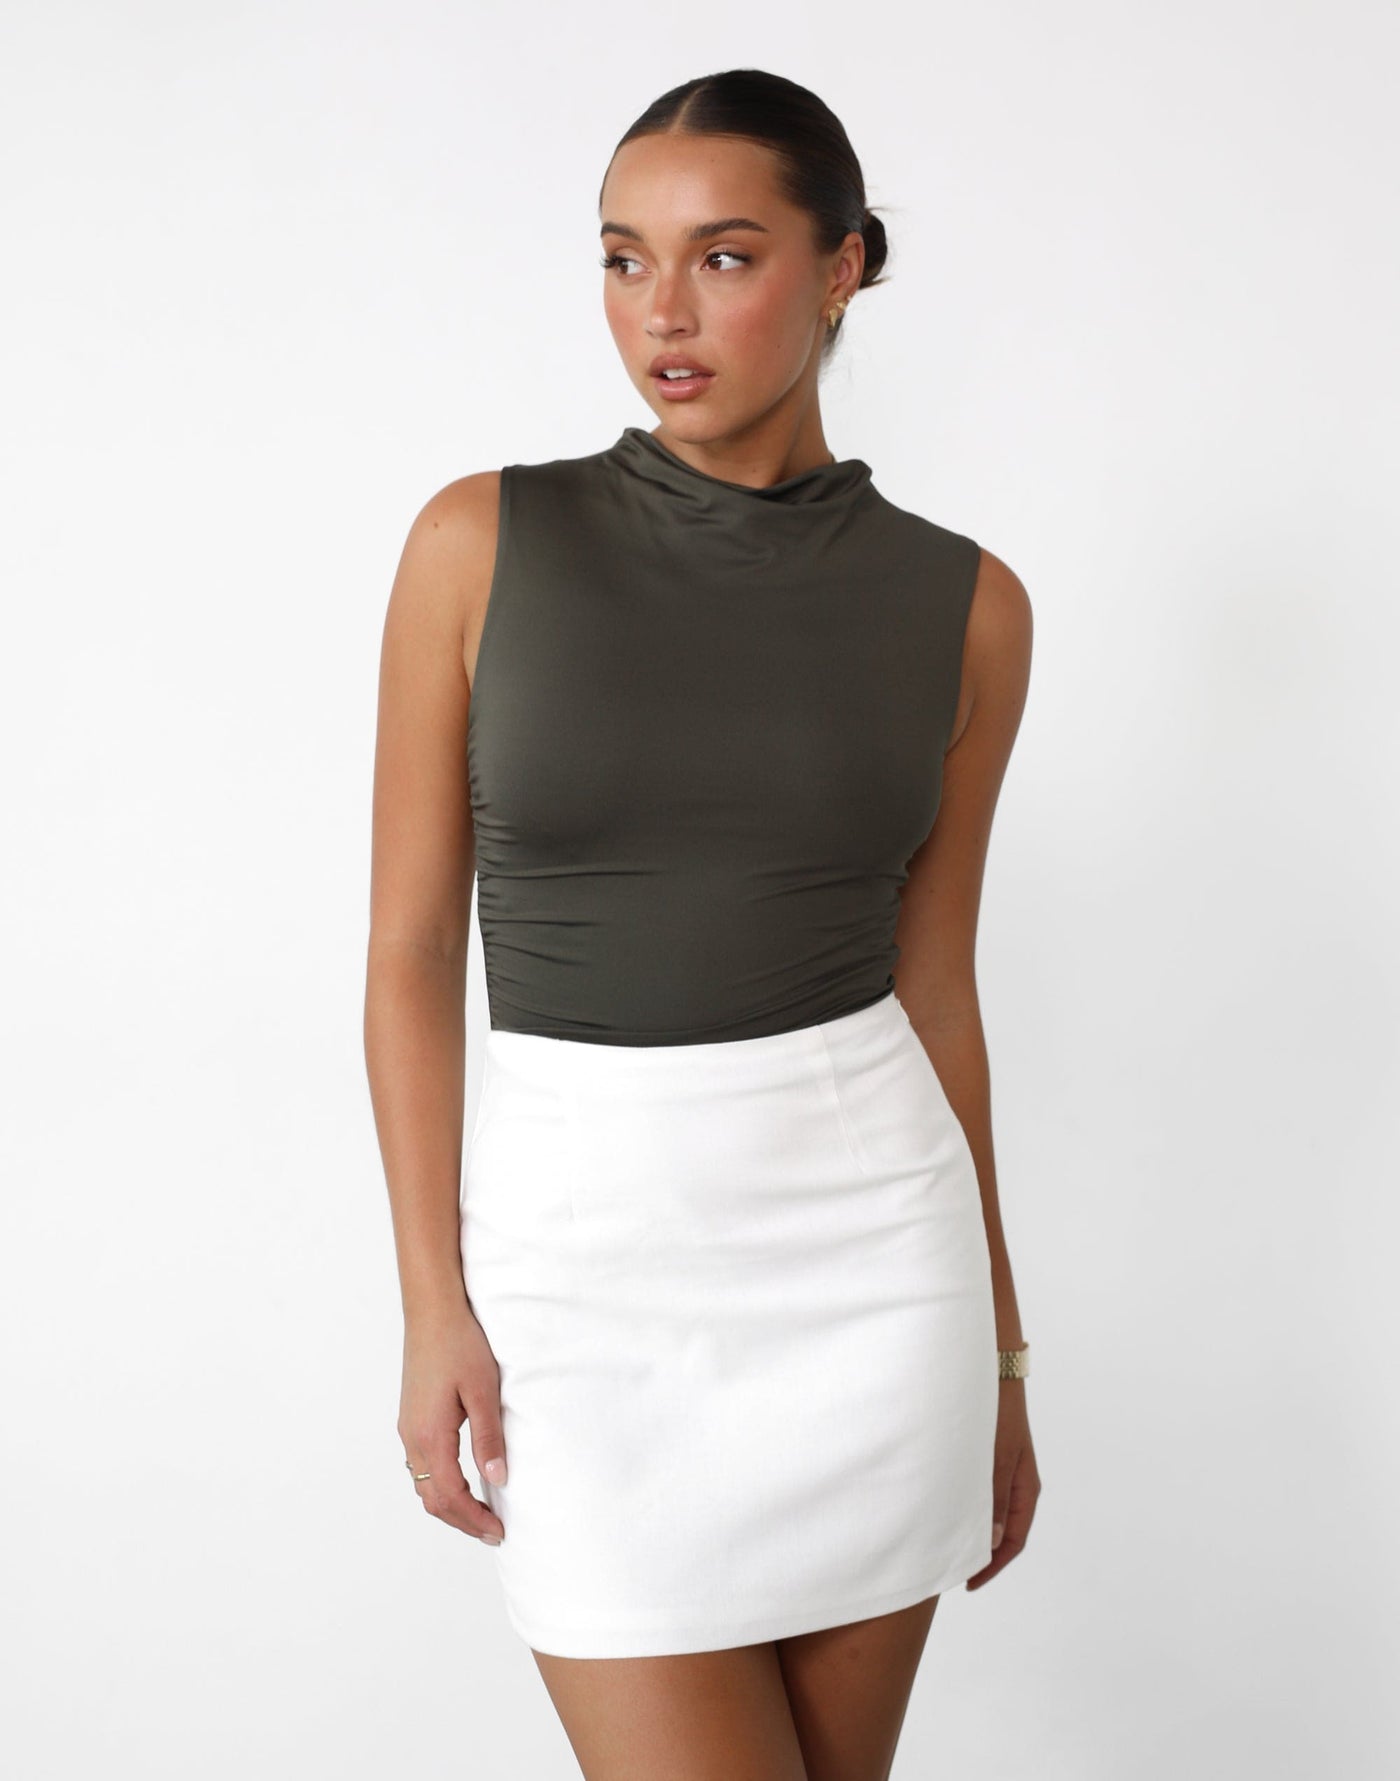 Madison Top (Burnt Olive) - High Cowl Neck Bodycon Top - Women's Top - Charcoal Clothing